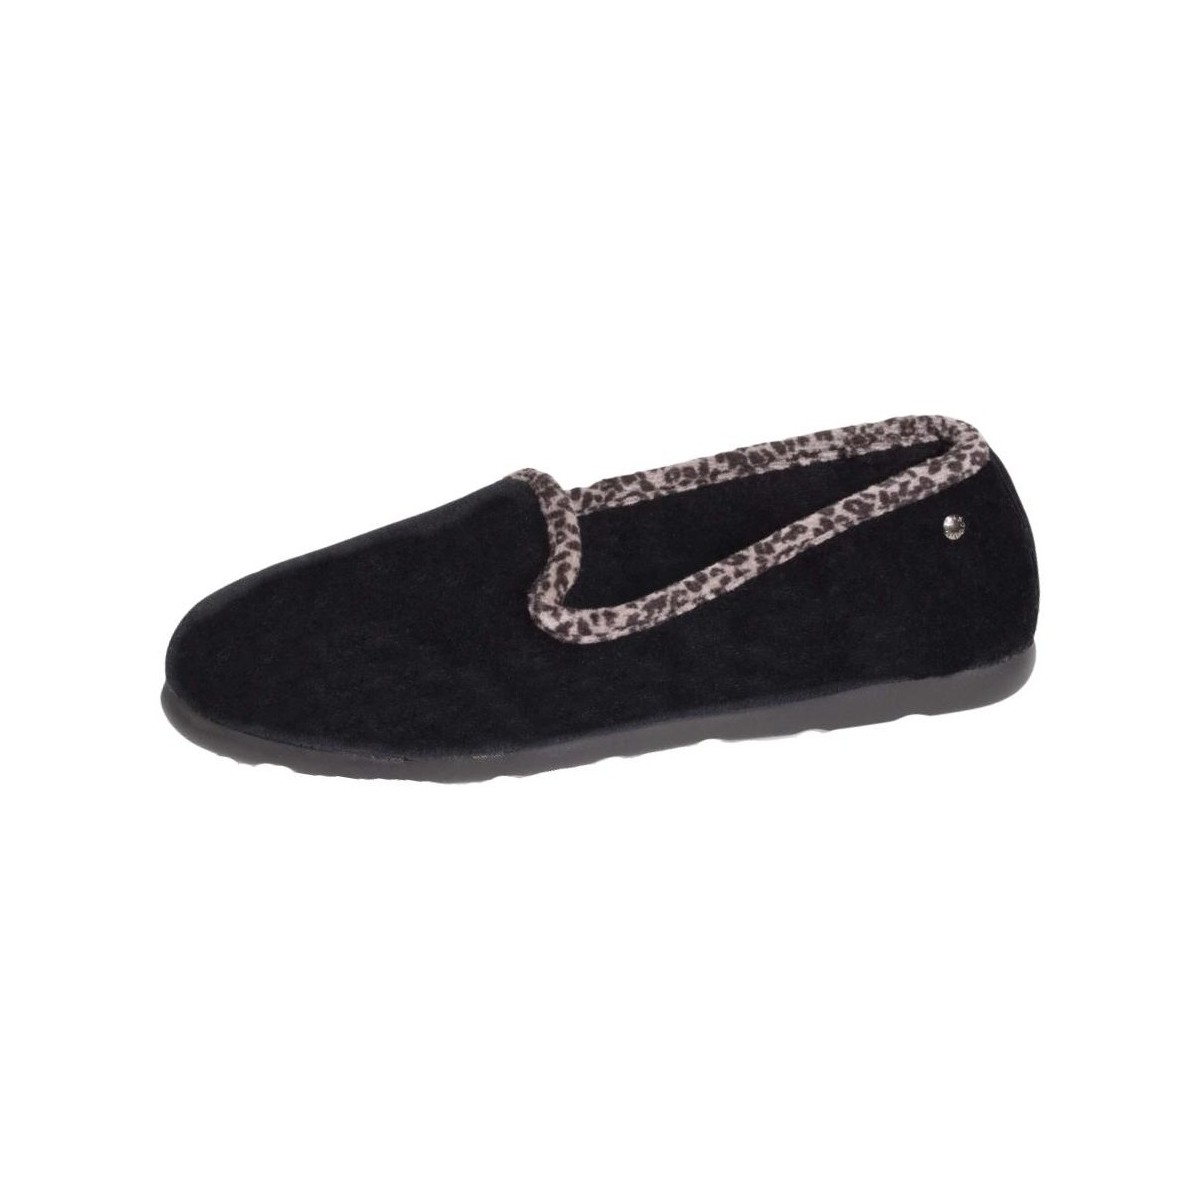 Chaussures Femme Chaussons Isotoner Chaussons slippers  ref 55185 Noir Noir